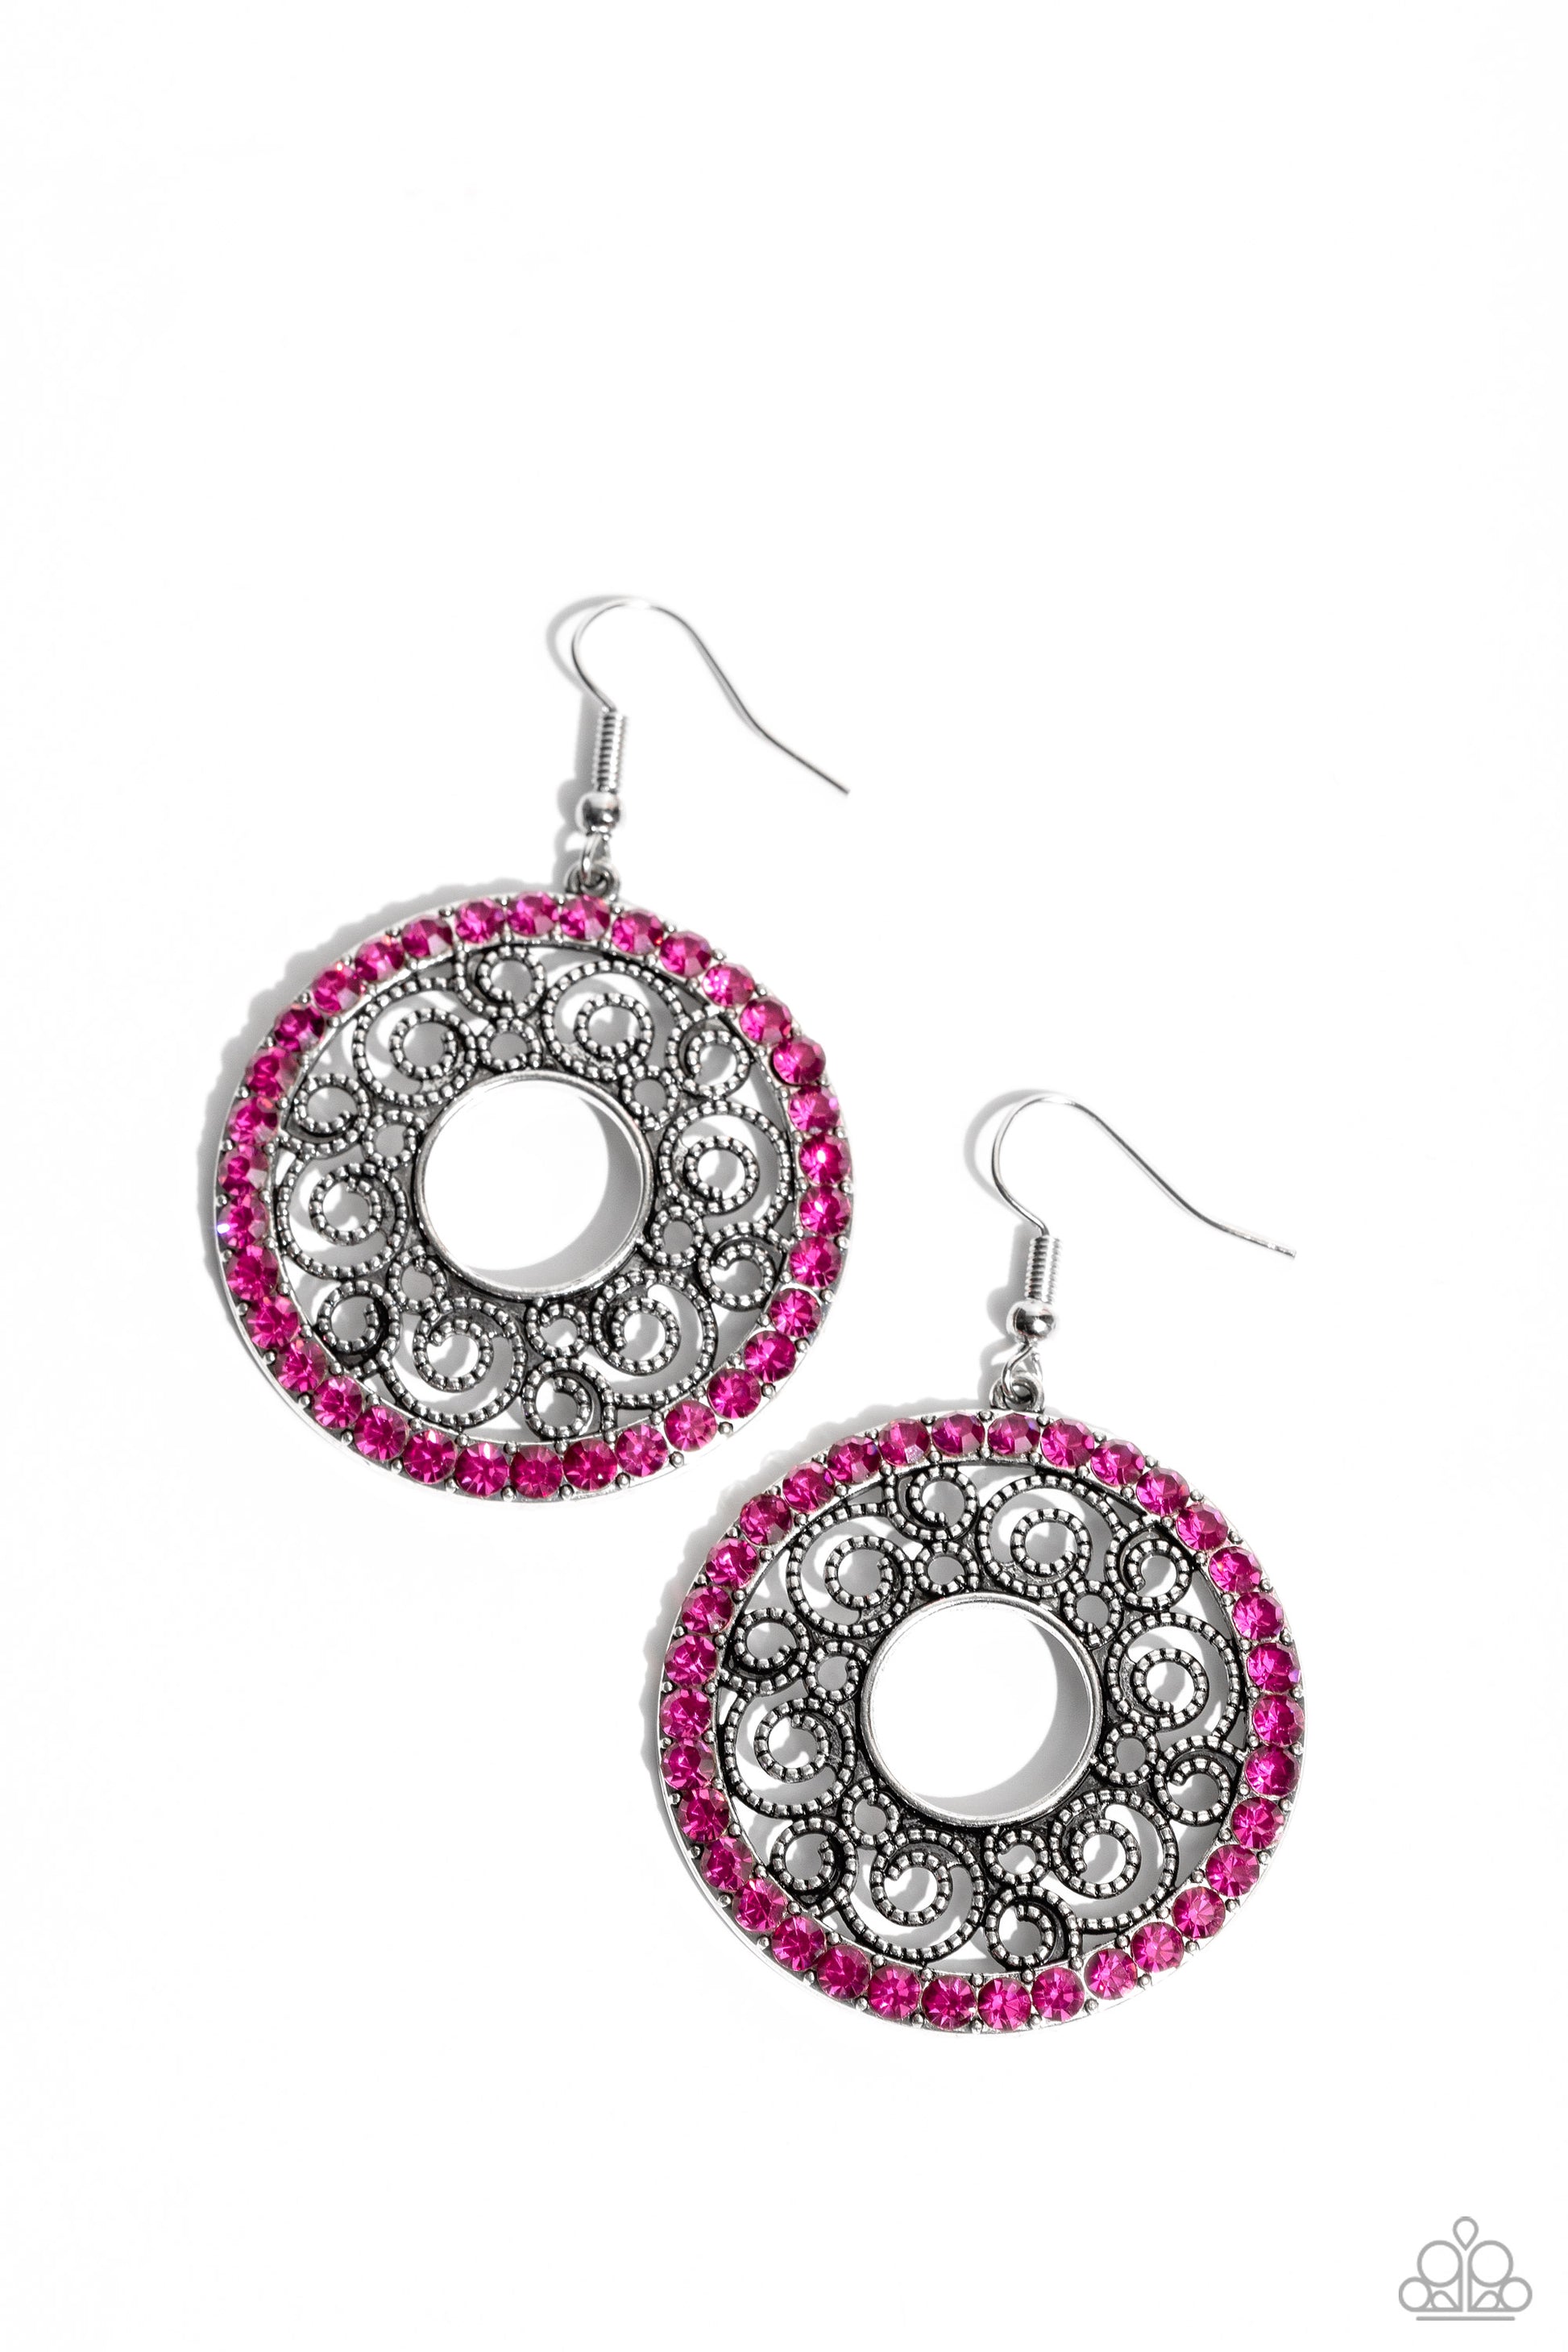 Whirly Whirlpool Pink Earring - Paparazzi Accessories  Bordered in a ring of glittery Fuchsia Fedora rhinestones, a rustic silver hoop is filled with whirly silver filigree for a wistful finish. Earring attaches to a standard fishhook fitting.  Sold as one pair of earrings.  P5RE-PKXX-250XX